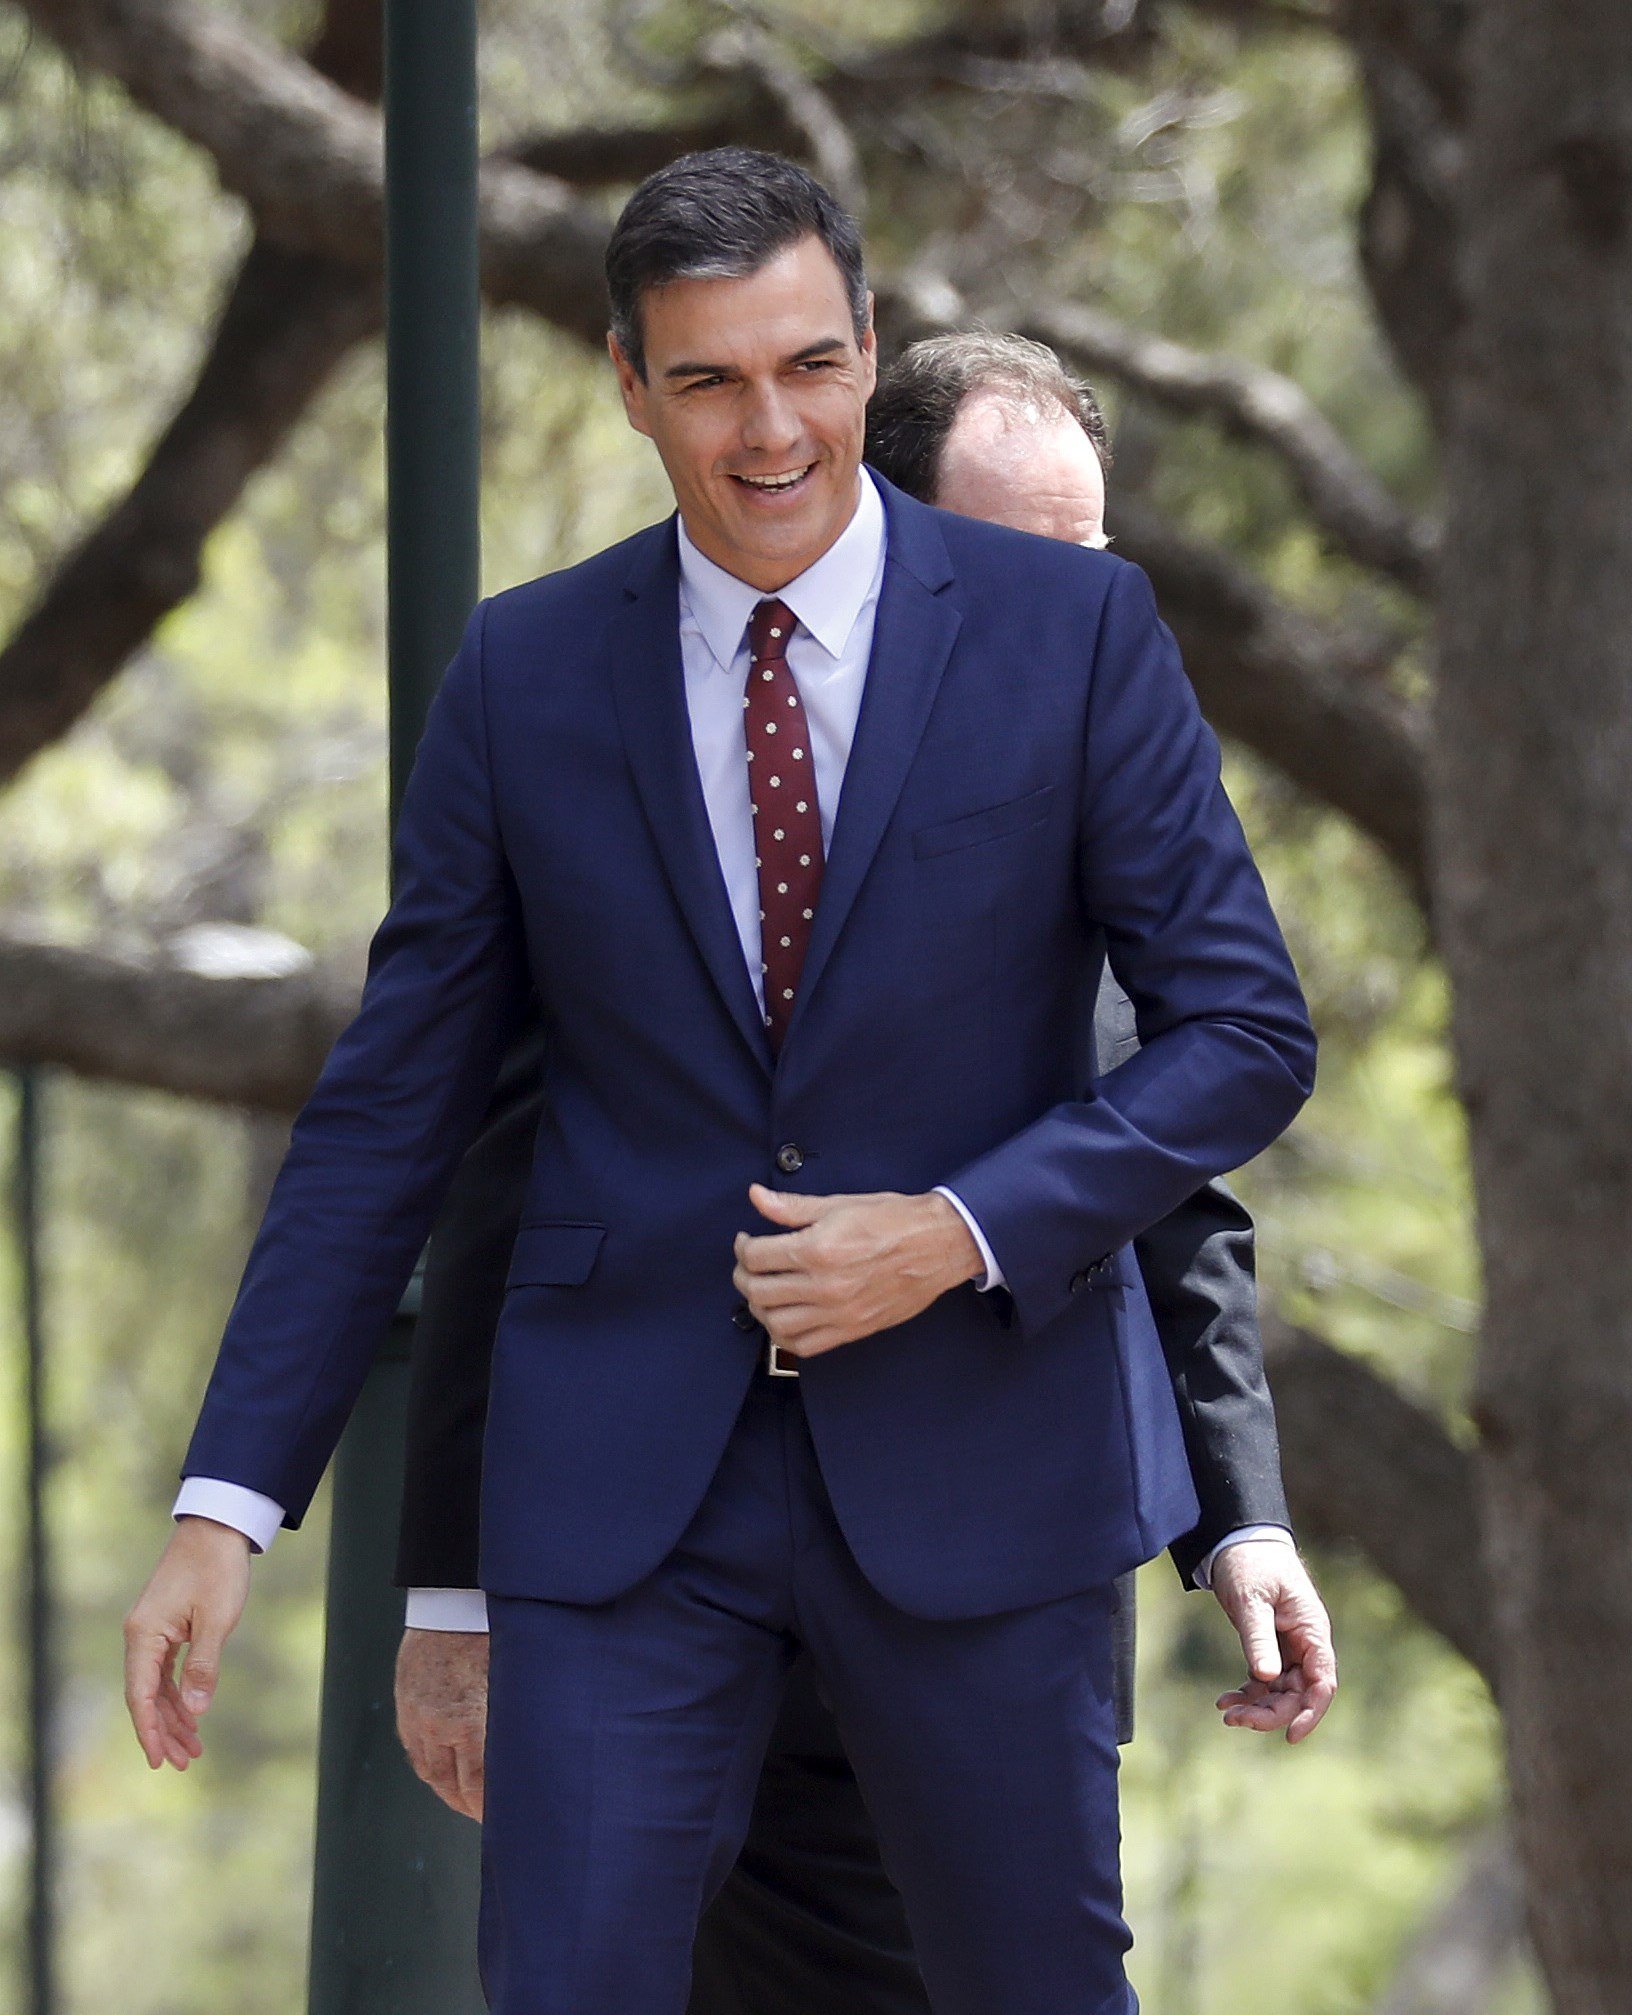 Sánchez won't present himself to be invested as Spanish PM without clear support